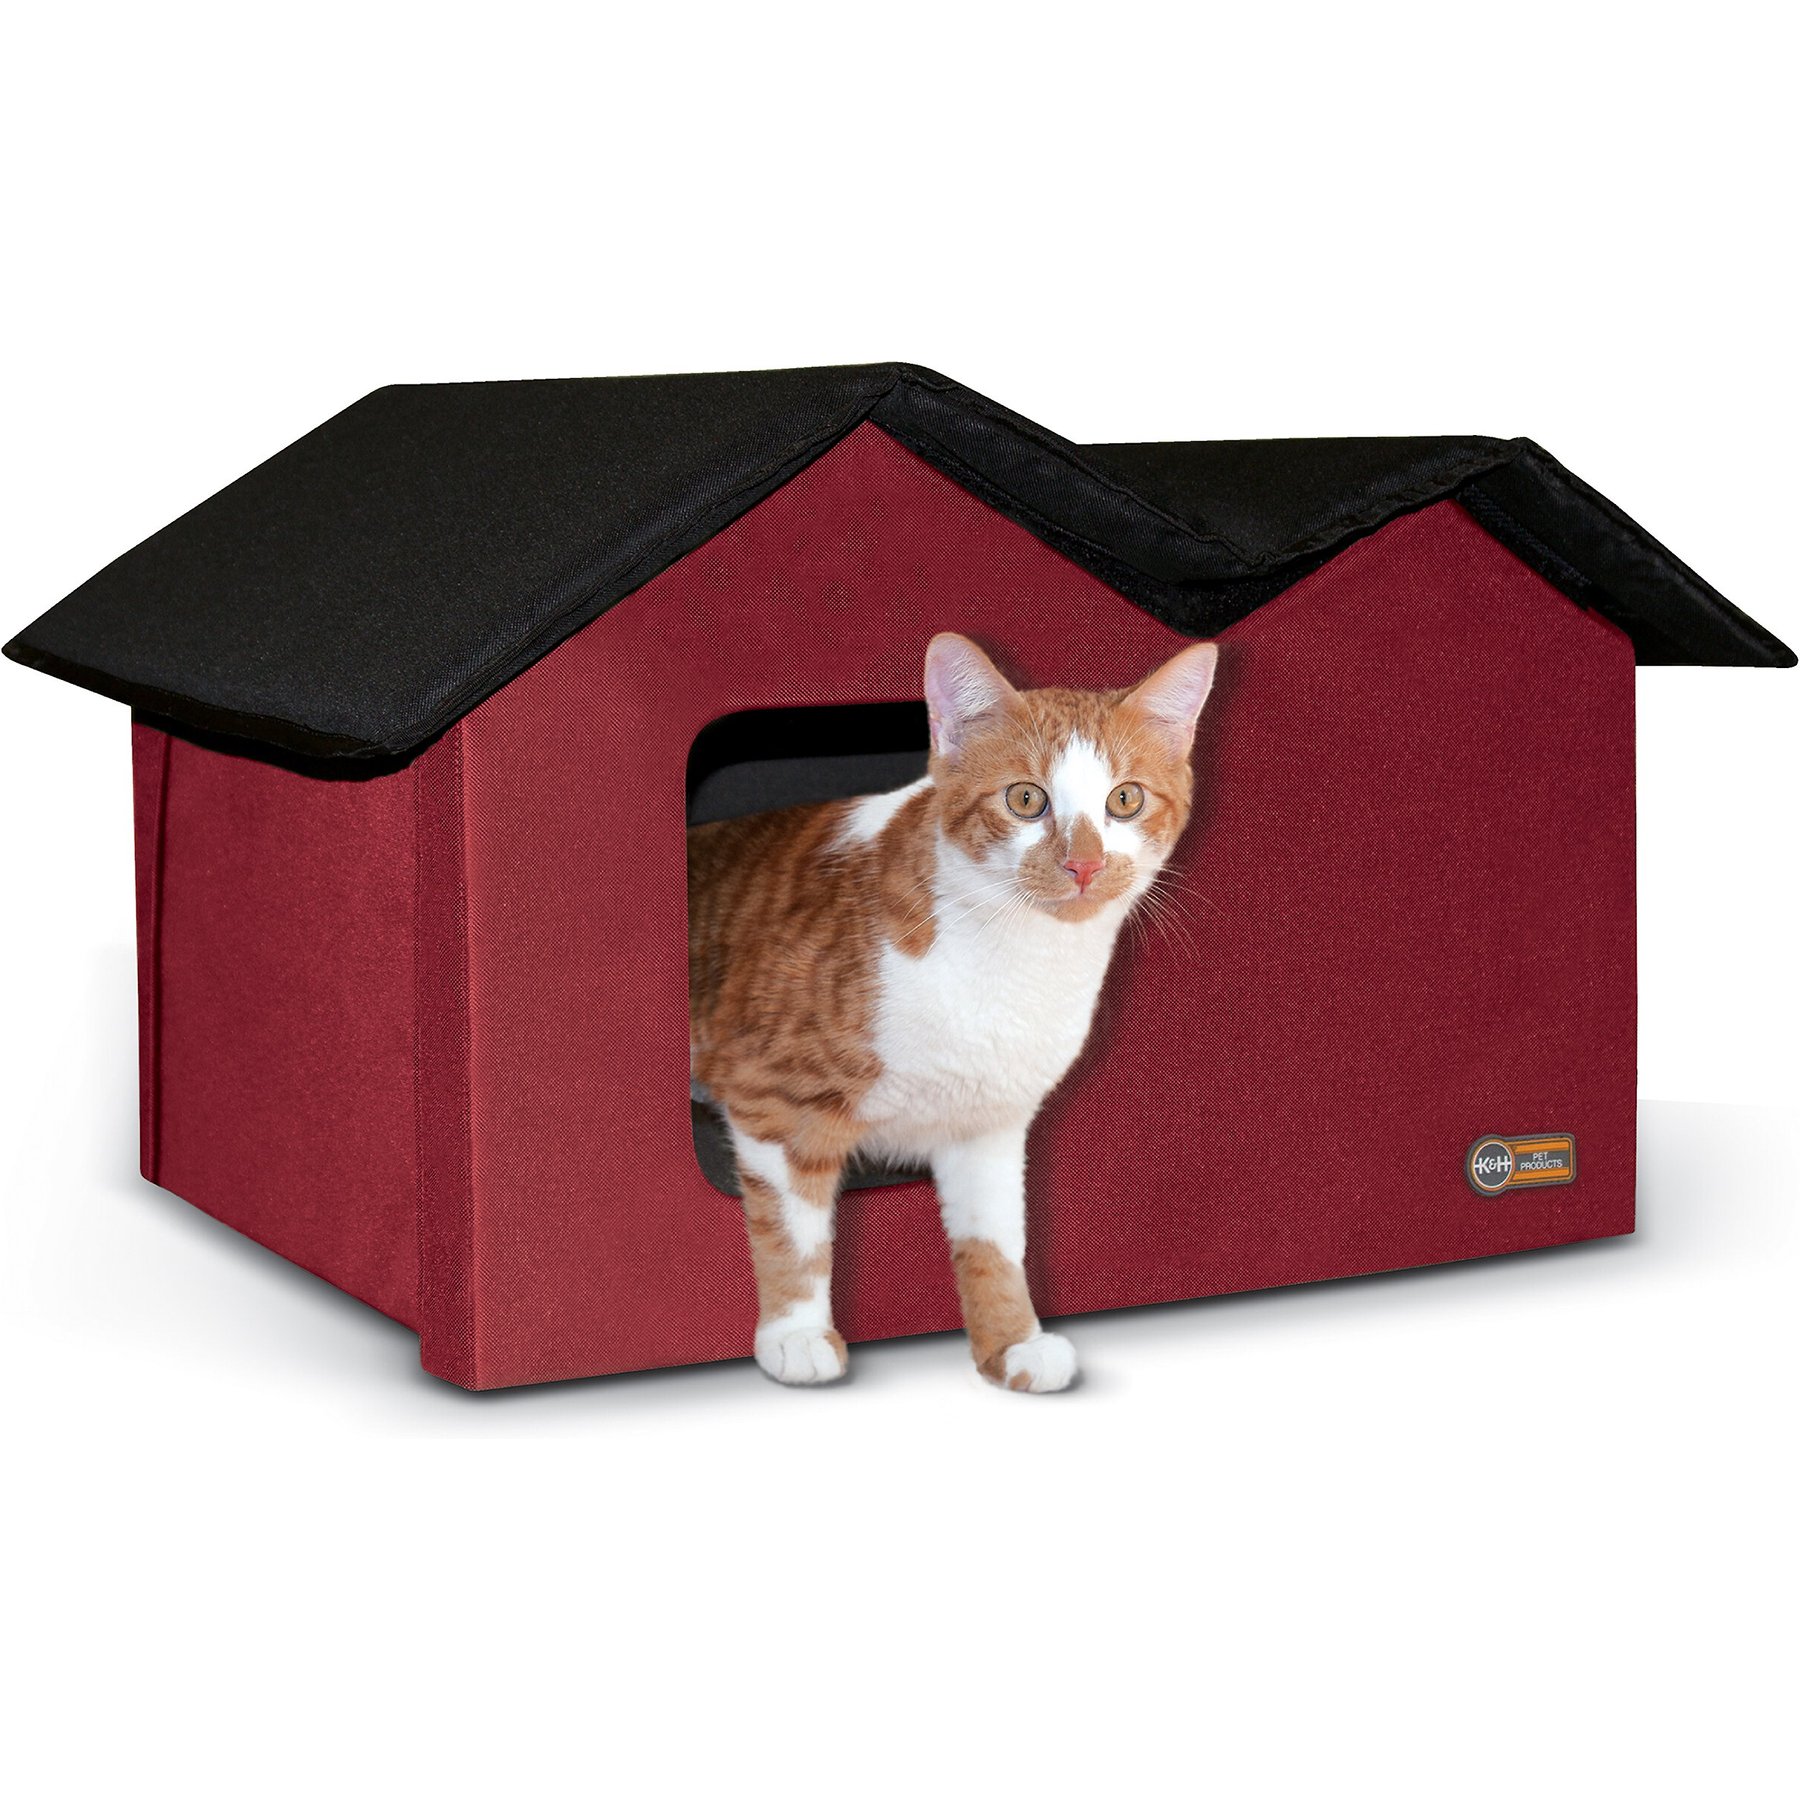  Heated Cat Houses for Outdoor Cats, Elevated, Waterproof and  Insulated - A Safe Pet House and Kitty Shelter for Your Cat or Small Dog to  Stay Warm & Dry 